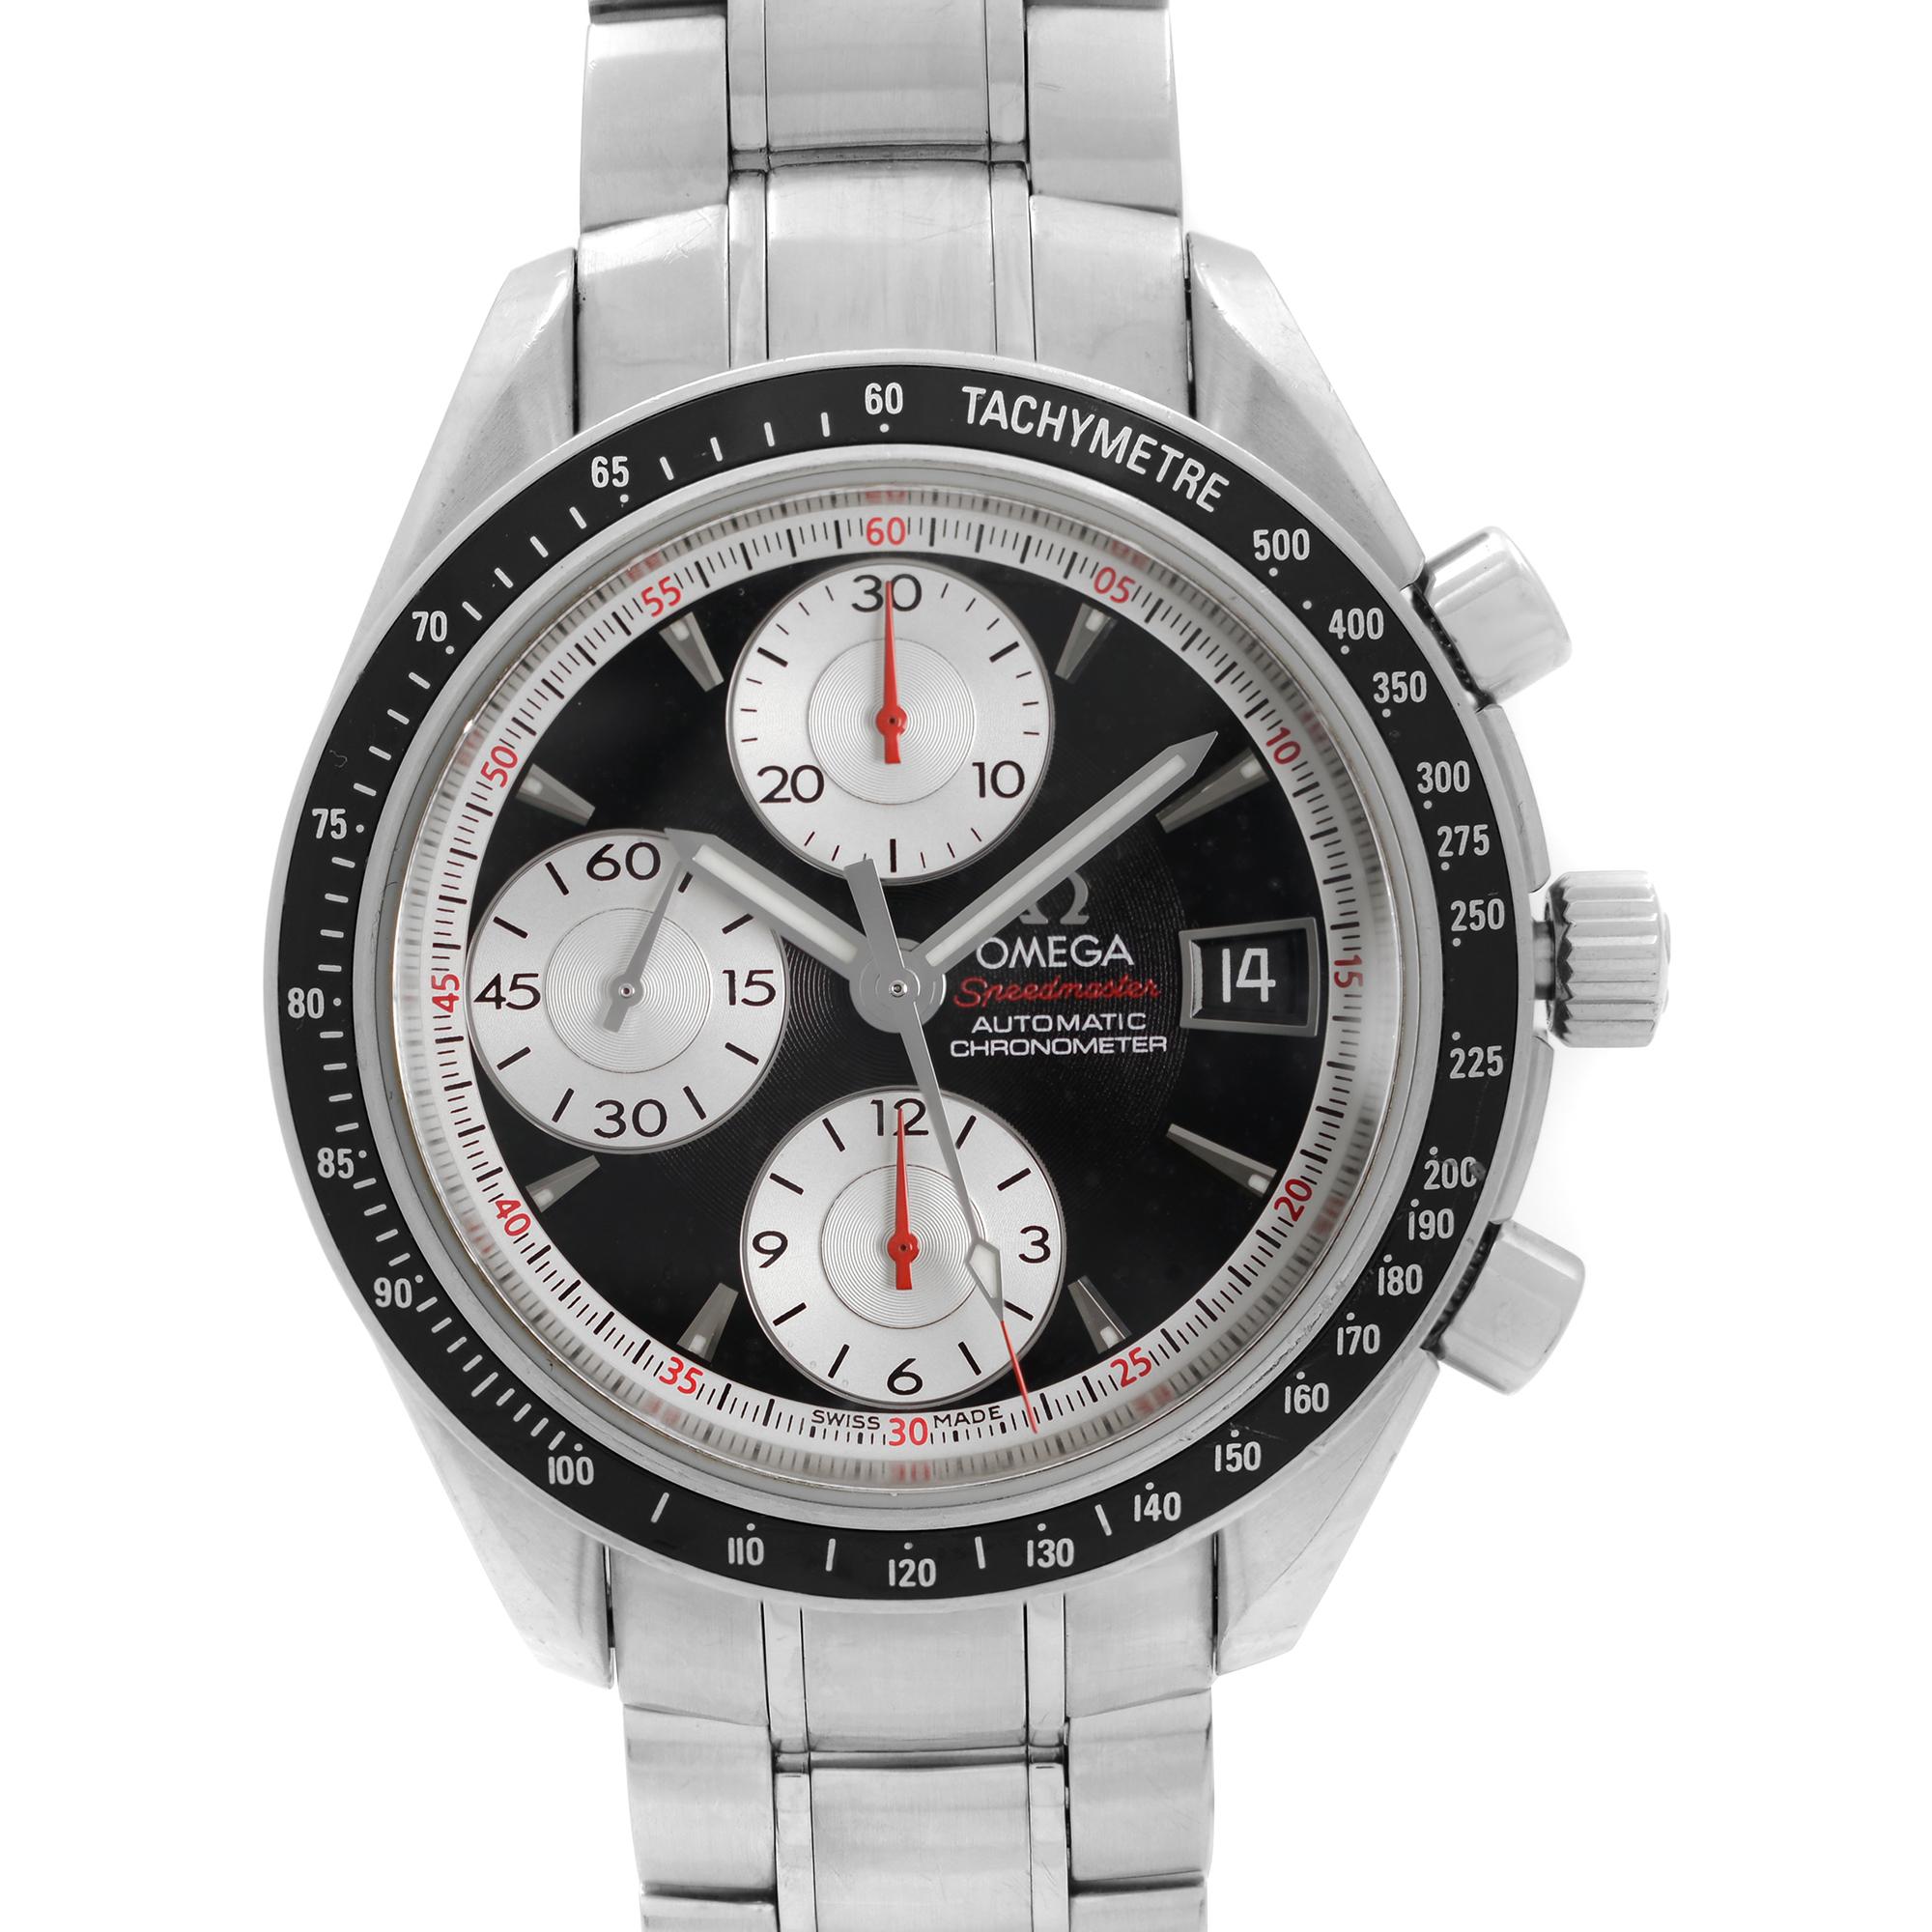 Pre Owned Omega Speedmaster 40mm Stainless Steel Chronograph Automatic Mens Watch 3210.51.00. This Beautiful Timepiece is Powered by Mechanical (Automatic) Movement And Features: Round Stainless Steel case and Bracelet, Fixed Stainless Steel Bezel